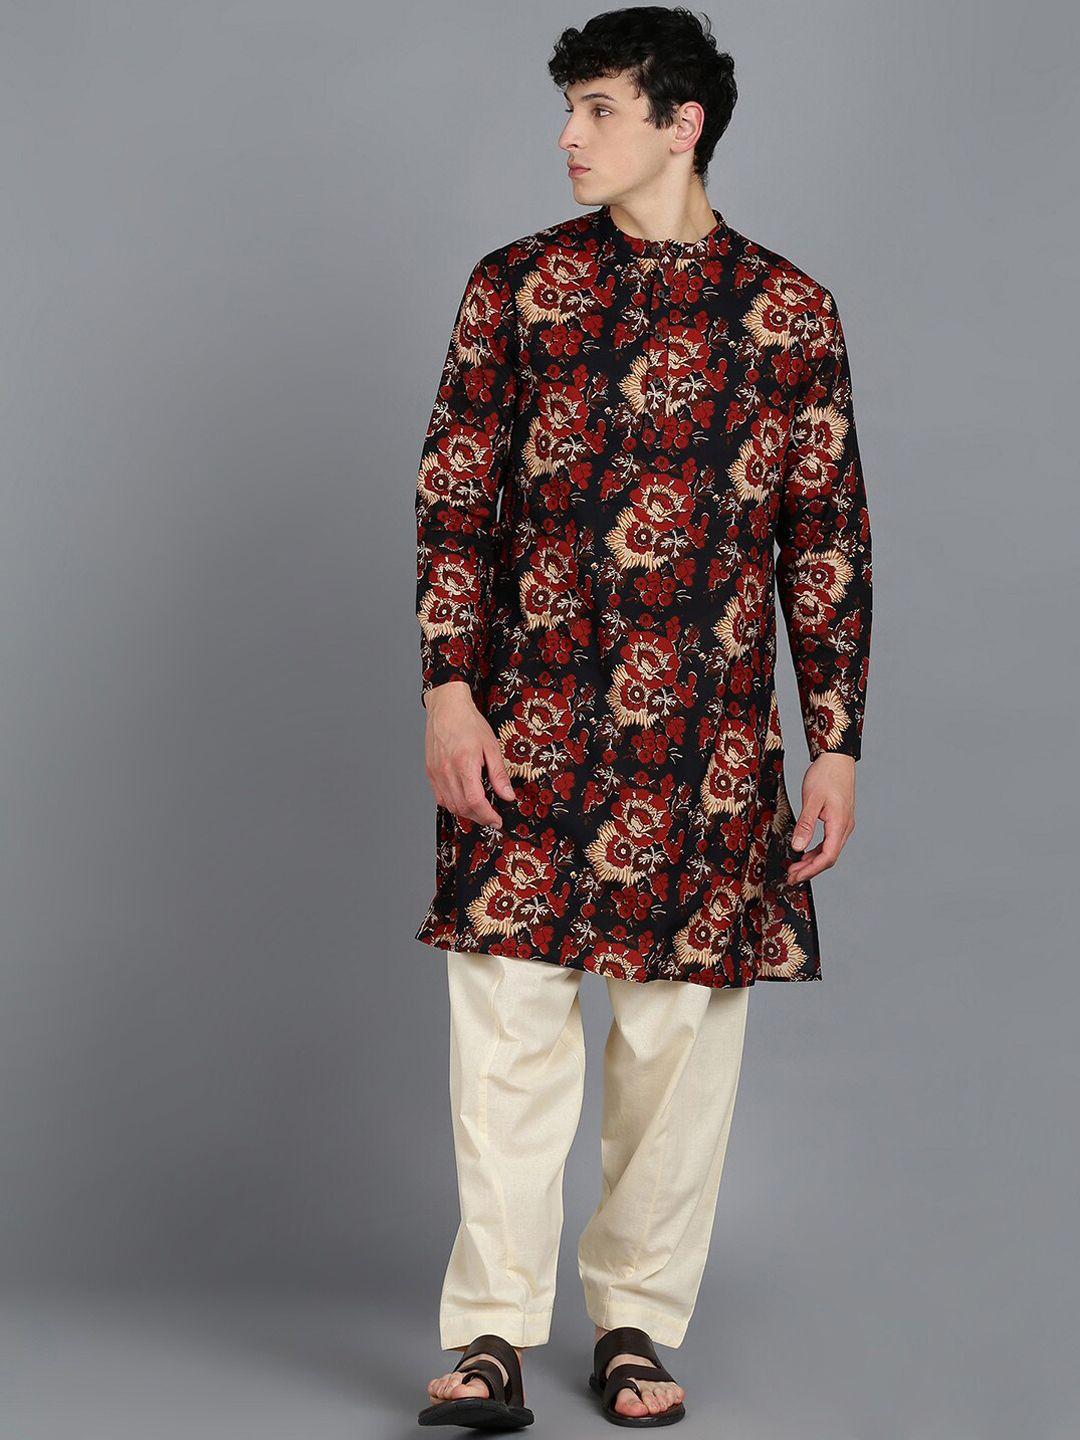 here&now black & red floral printed band collar pure cotton kurta with pyjamas